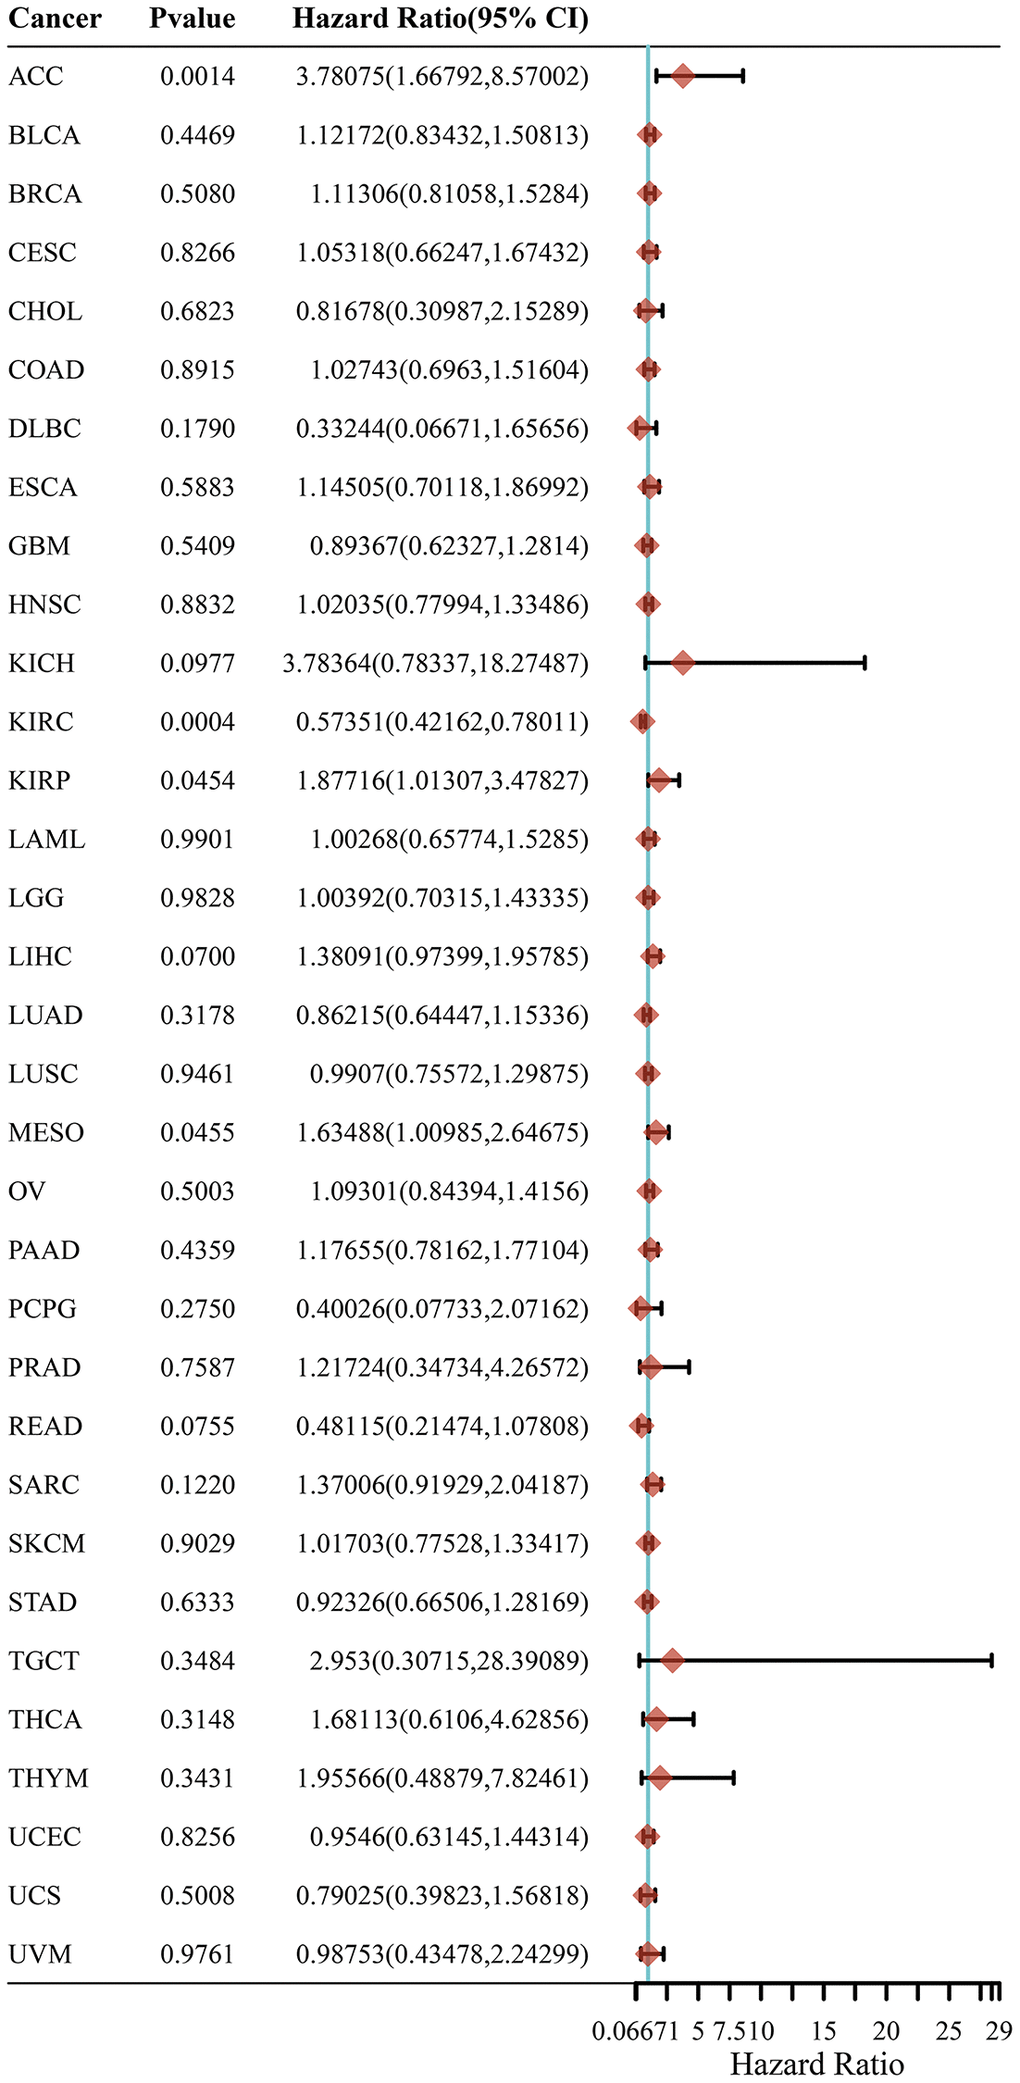 LRP6 expression correlates with the prognosis of patients with KIRC. The p-value, risk coefficient (HR) and confidence interval of LRP6 in multiple tumours are analyzed by univariate Cox regression.